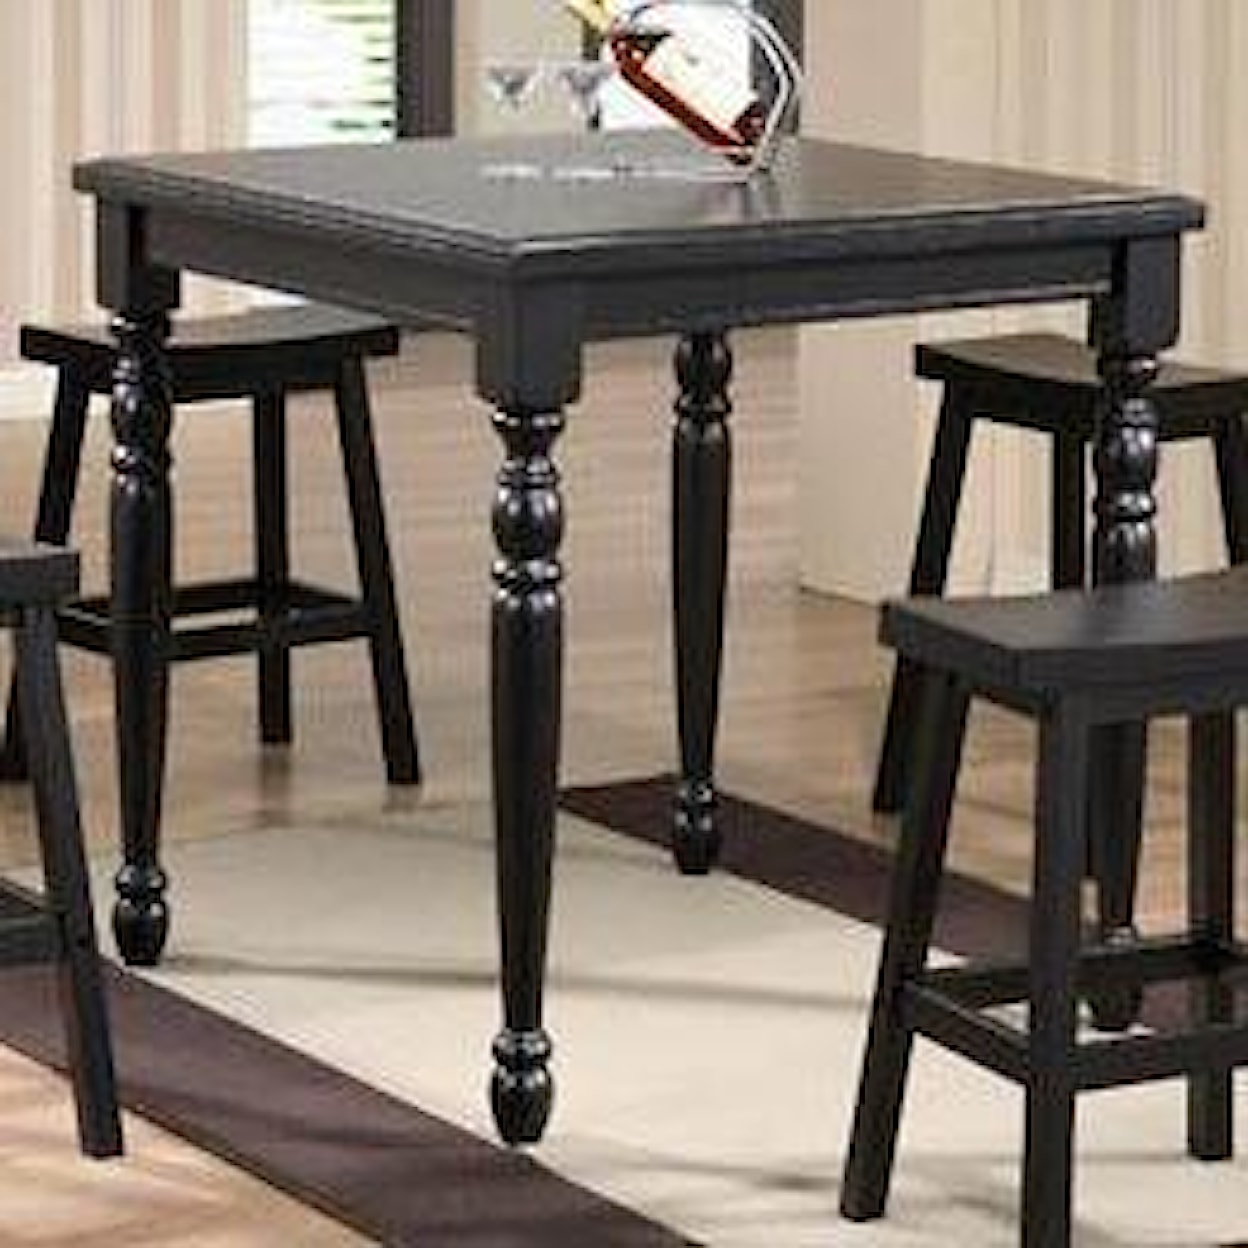 Winners Only Quails Run 36" Square Tall Table